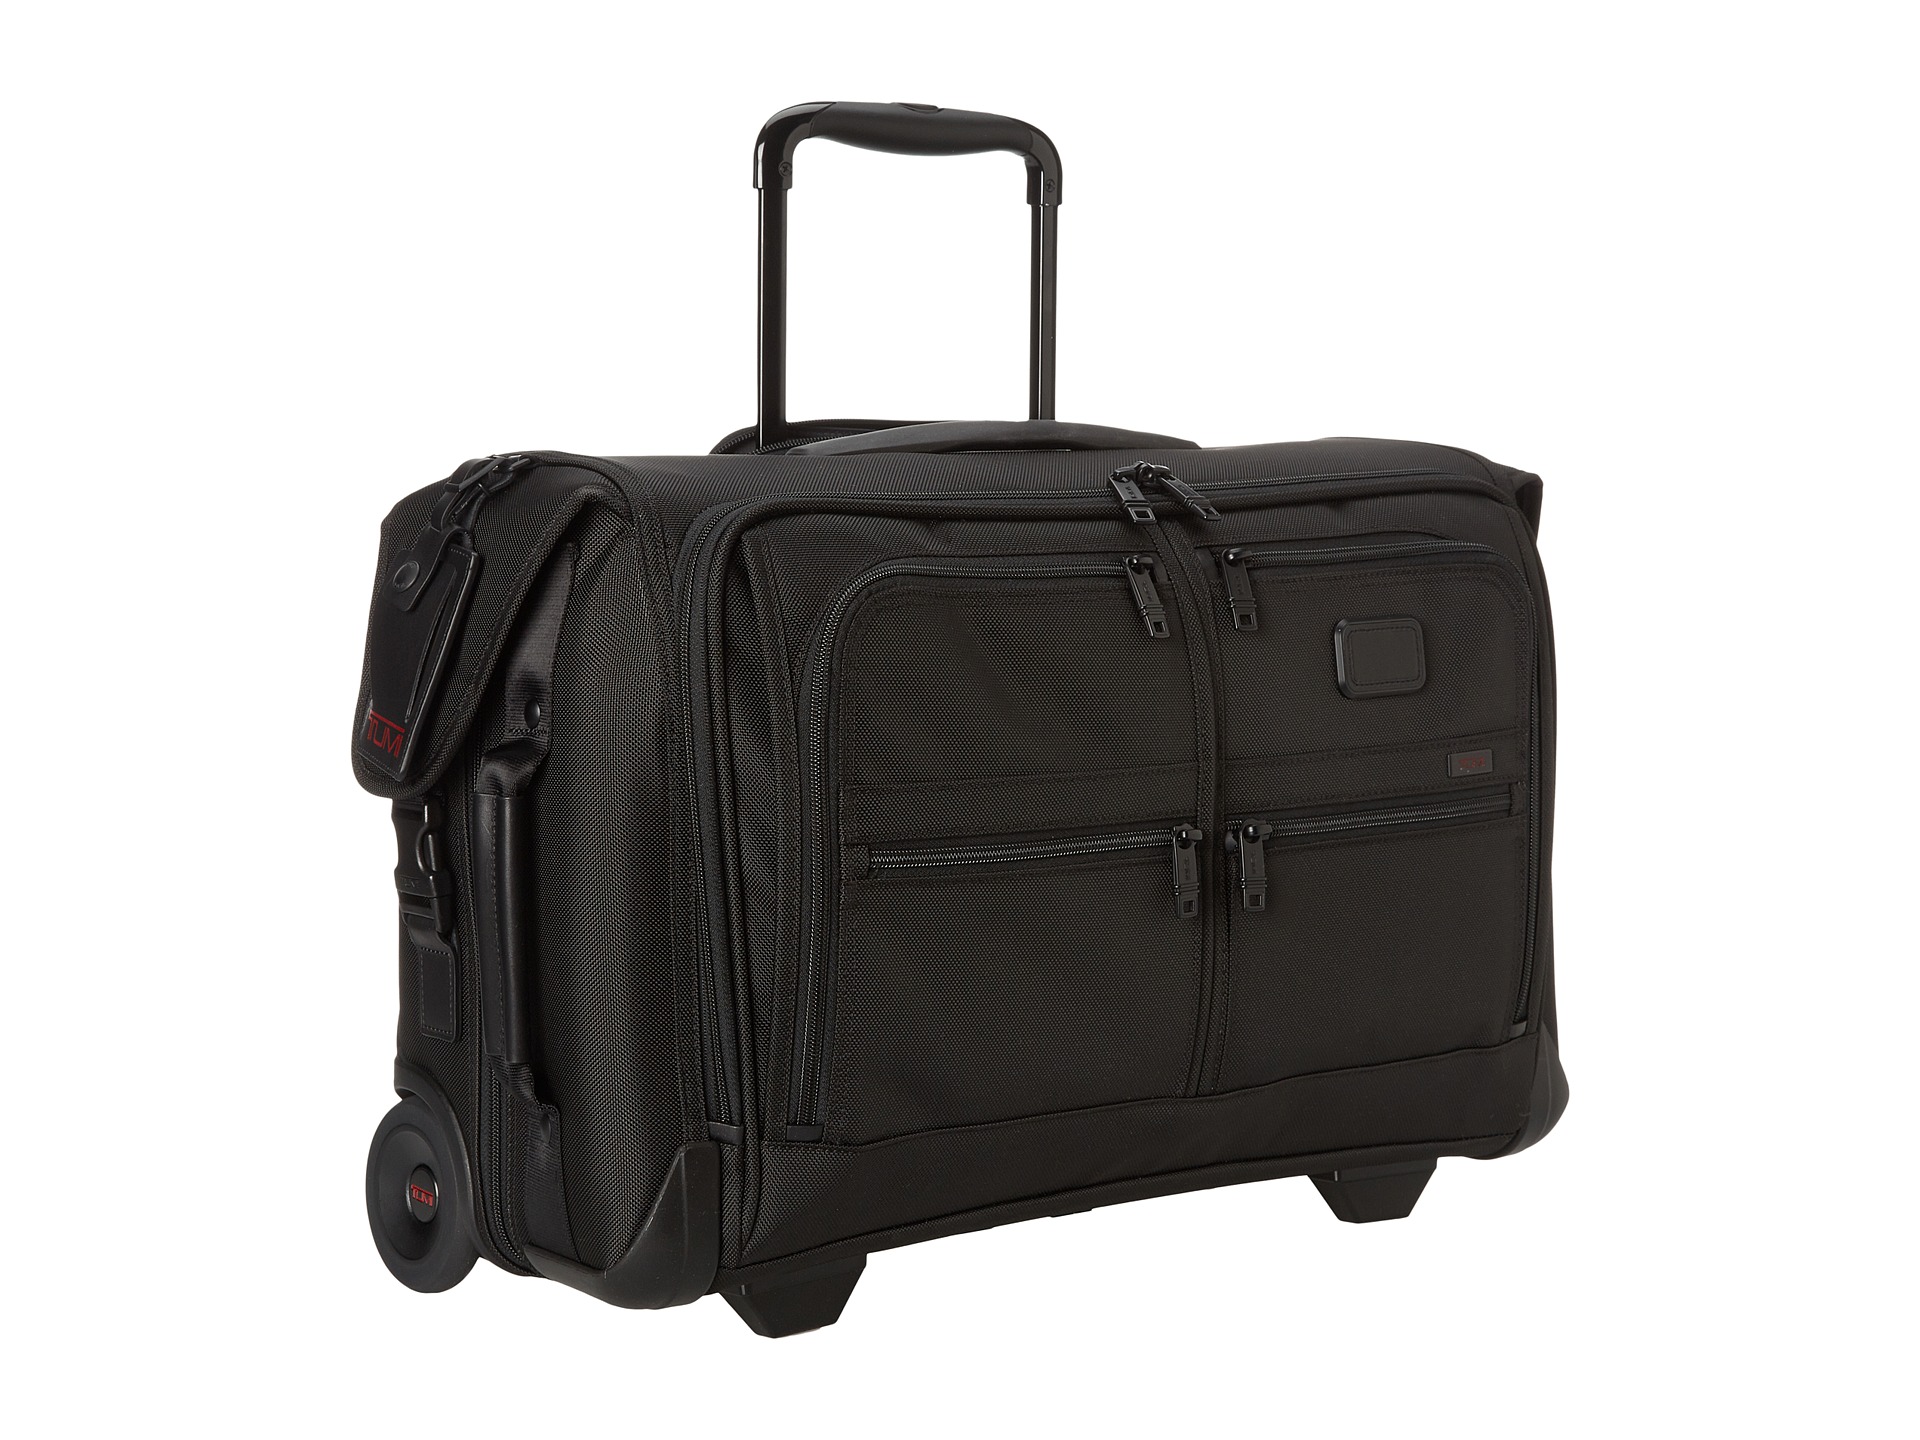 Tumi Alpha 2 Wheeled Carry On Garment Bag | Shipped Free at Zappos